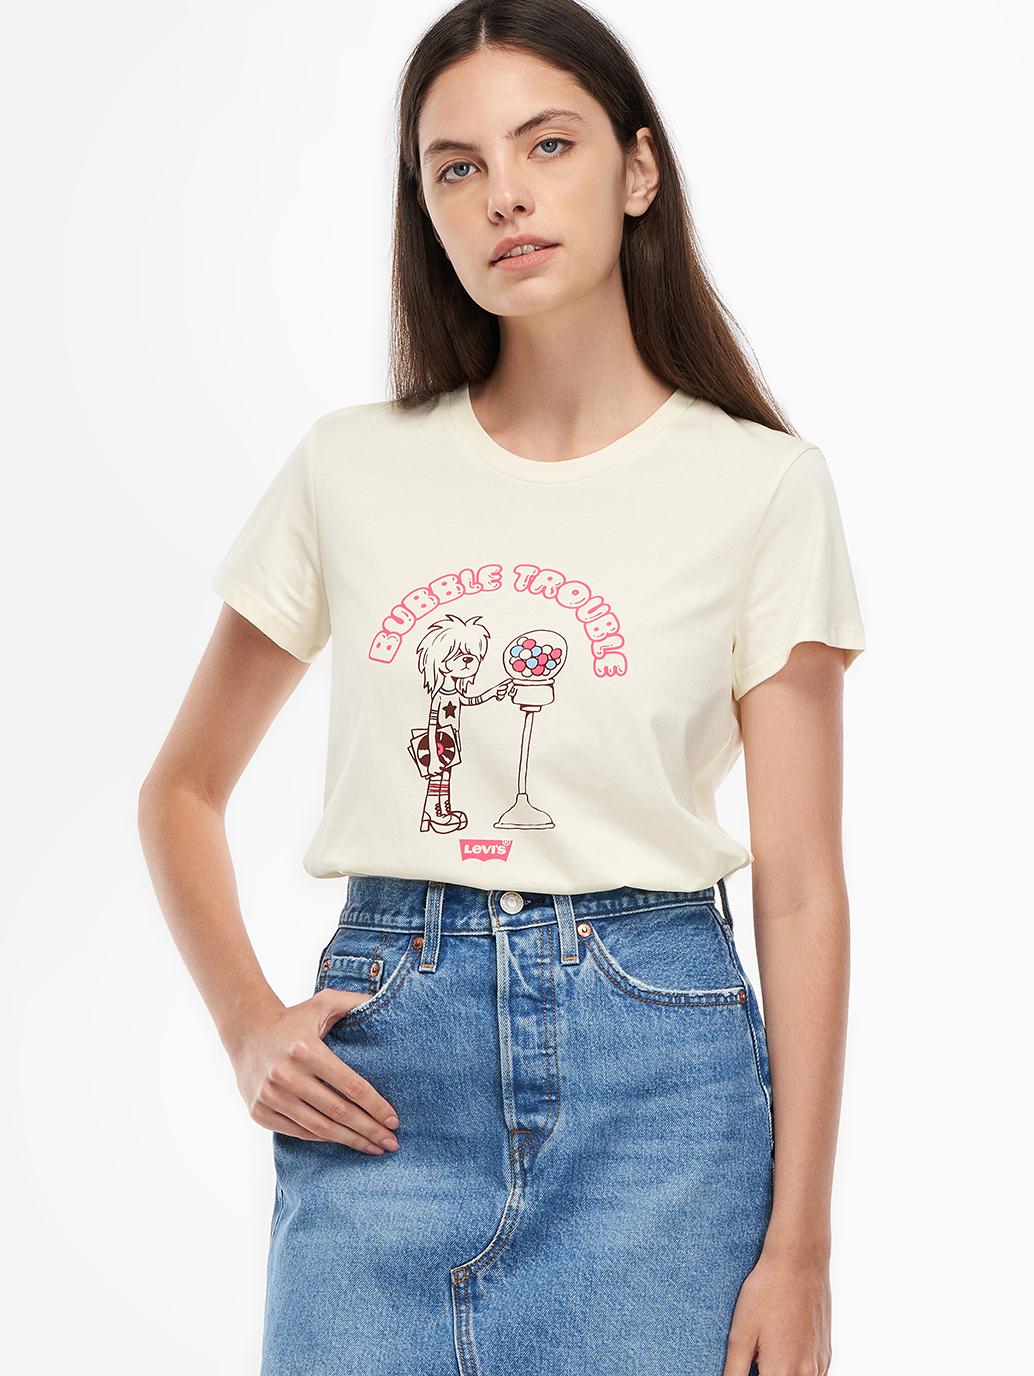 Levi's Women's The Perfect Tee T-Shirt